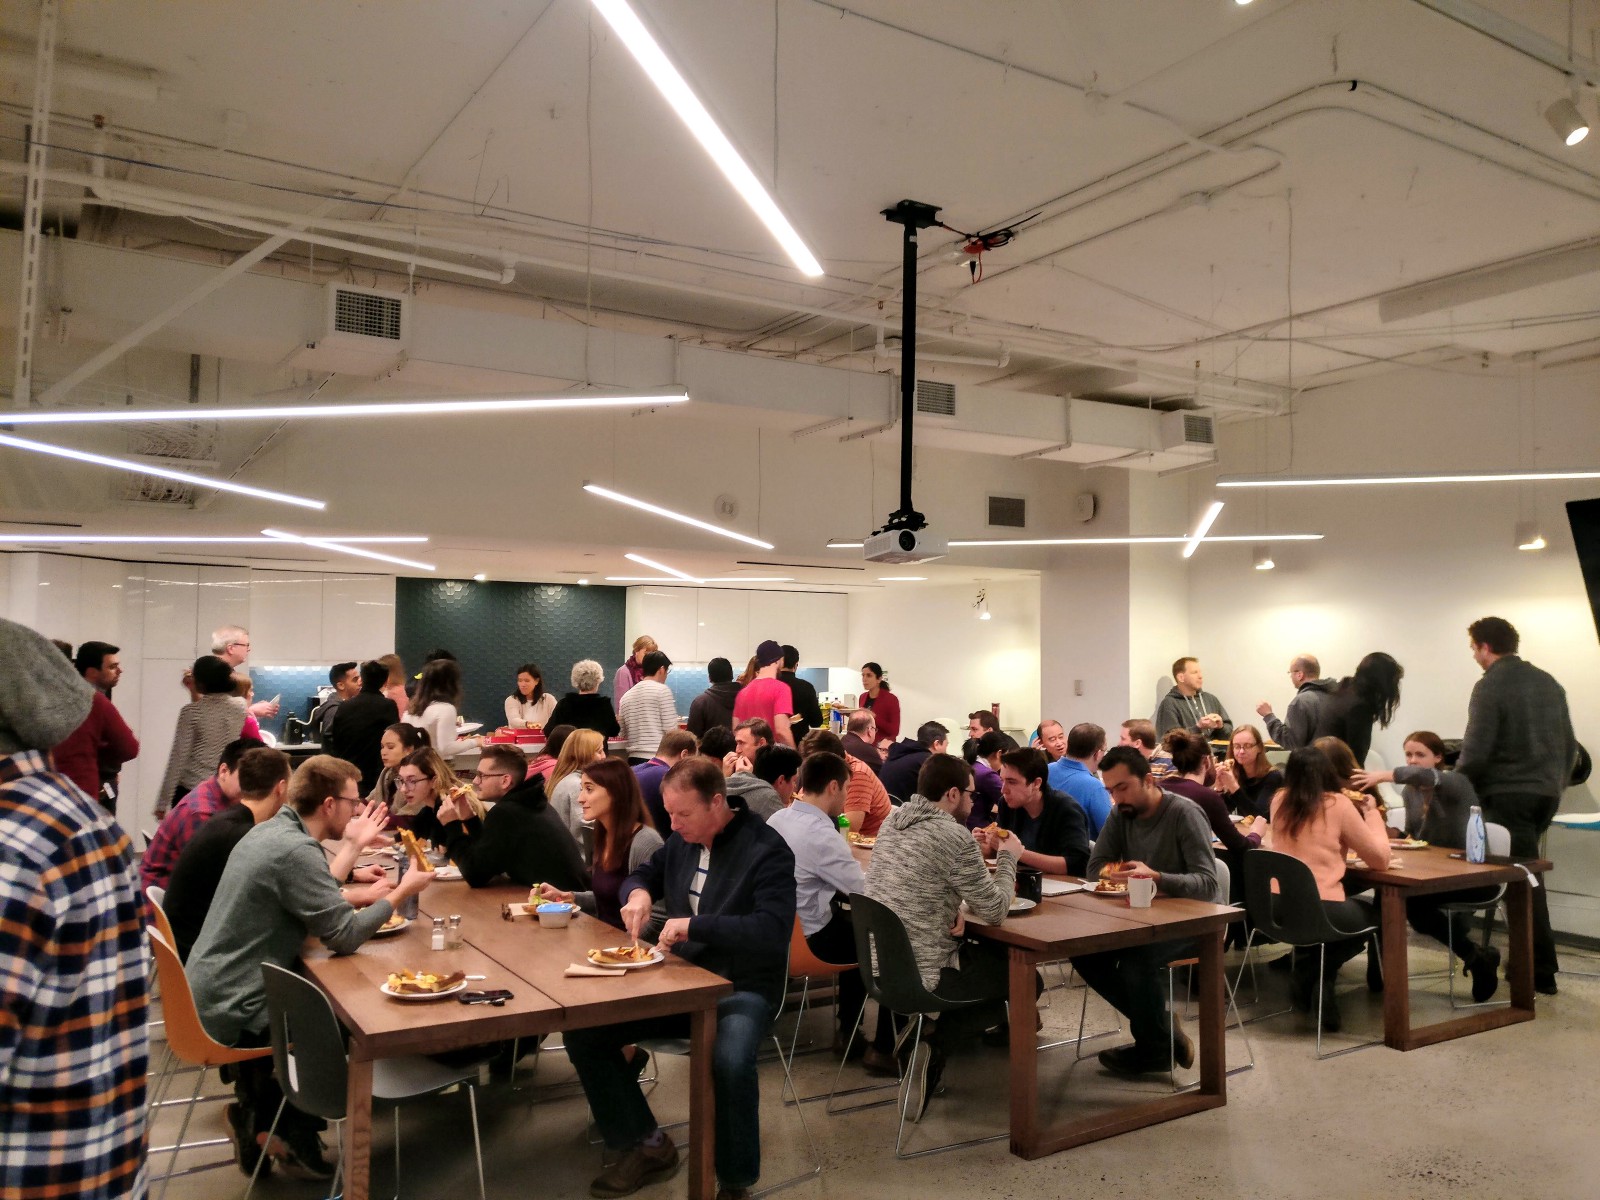 Celebrating some key milestones at Klipfolio with some cake and pizza! - People eating food in a large kitchen